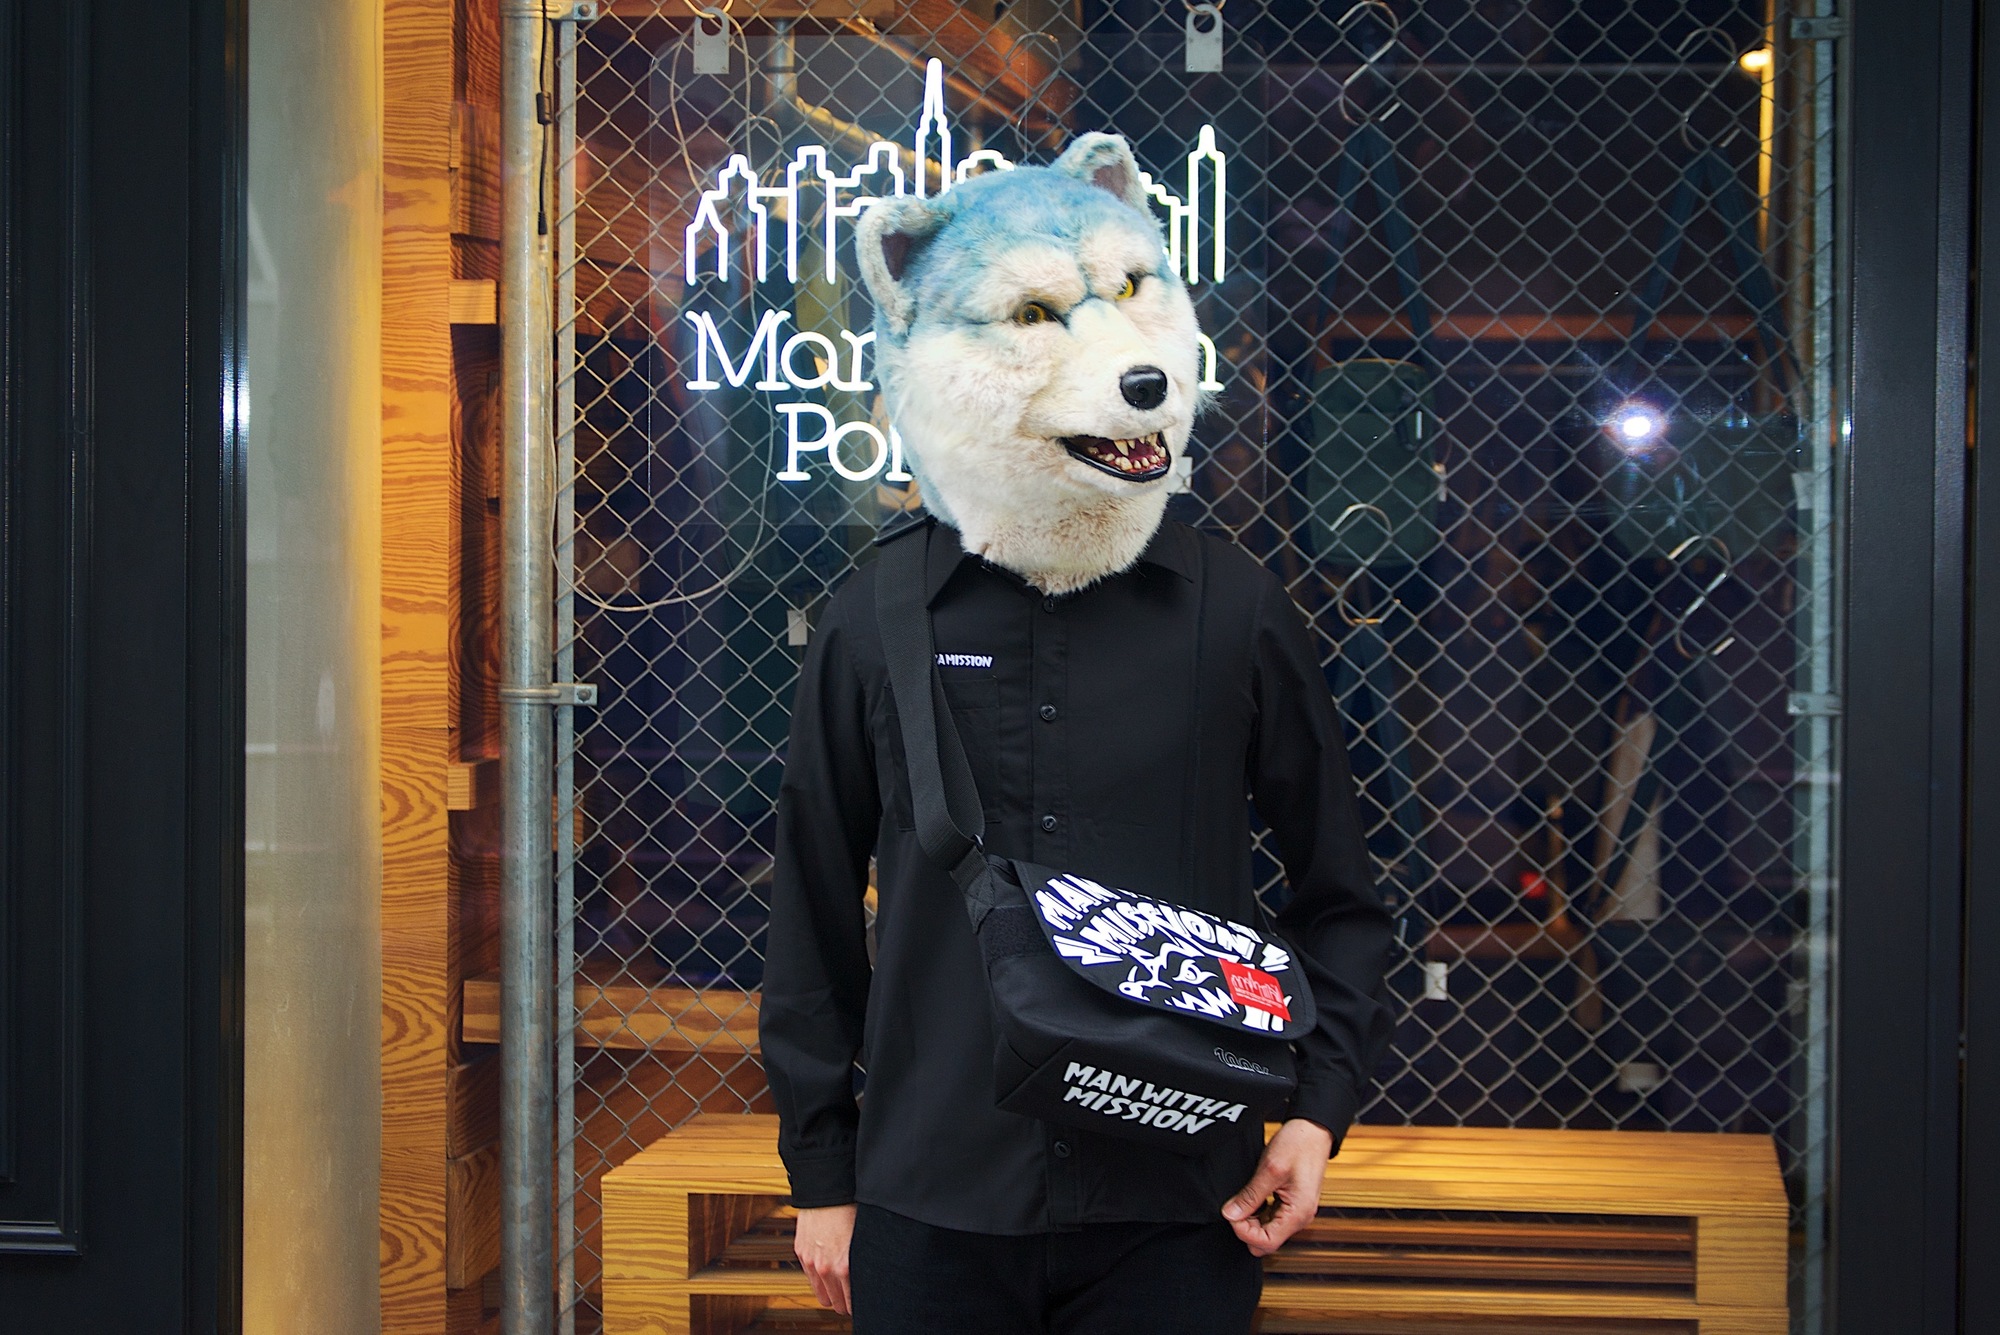 Manhattan Portage × MAN WITH A MISSION】コラボレーション決定